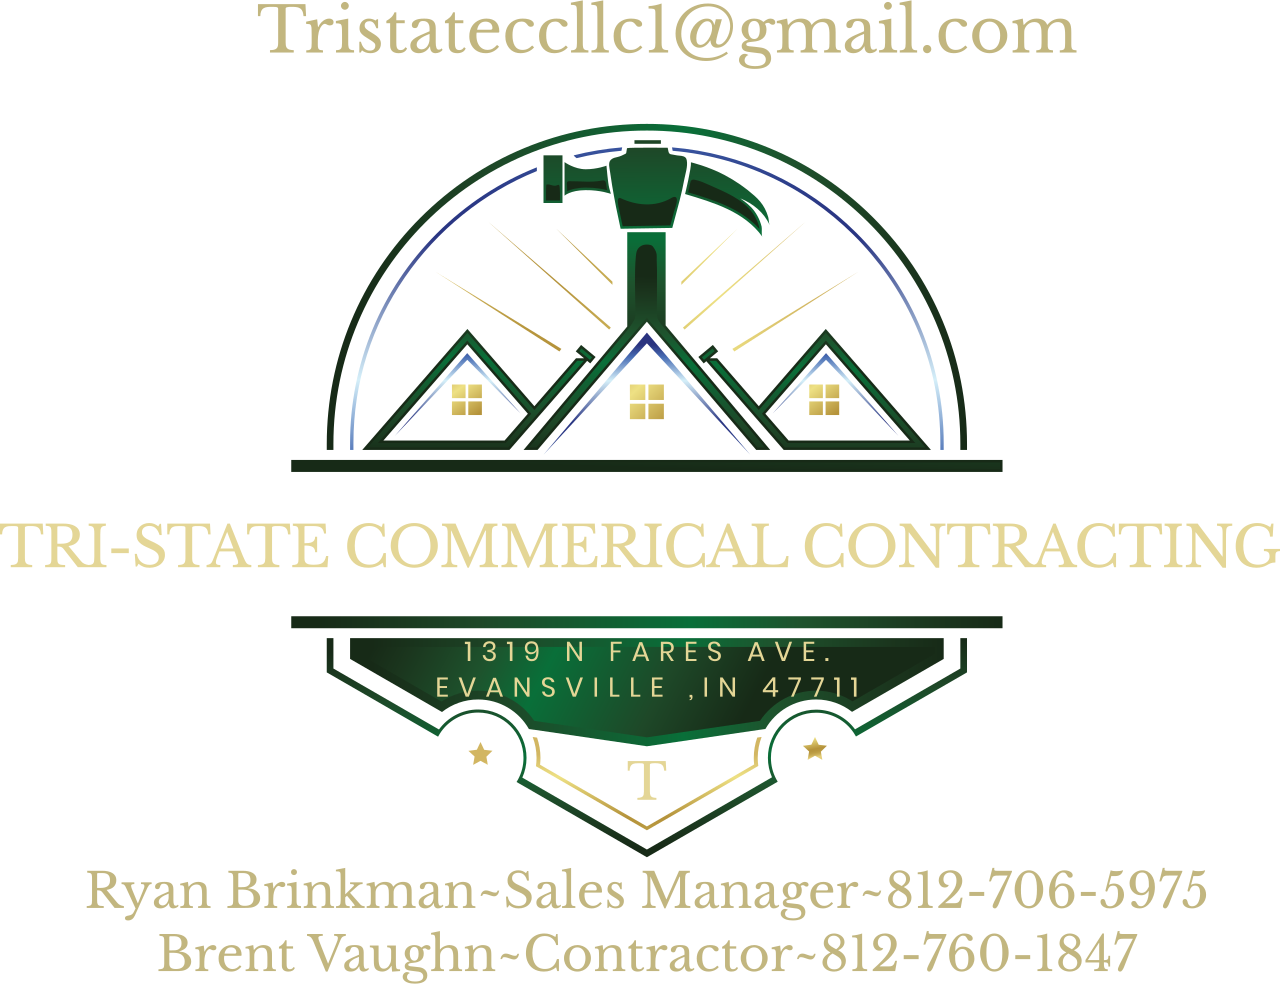 Tri-State Commerical Contracting 's logo